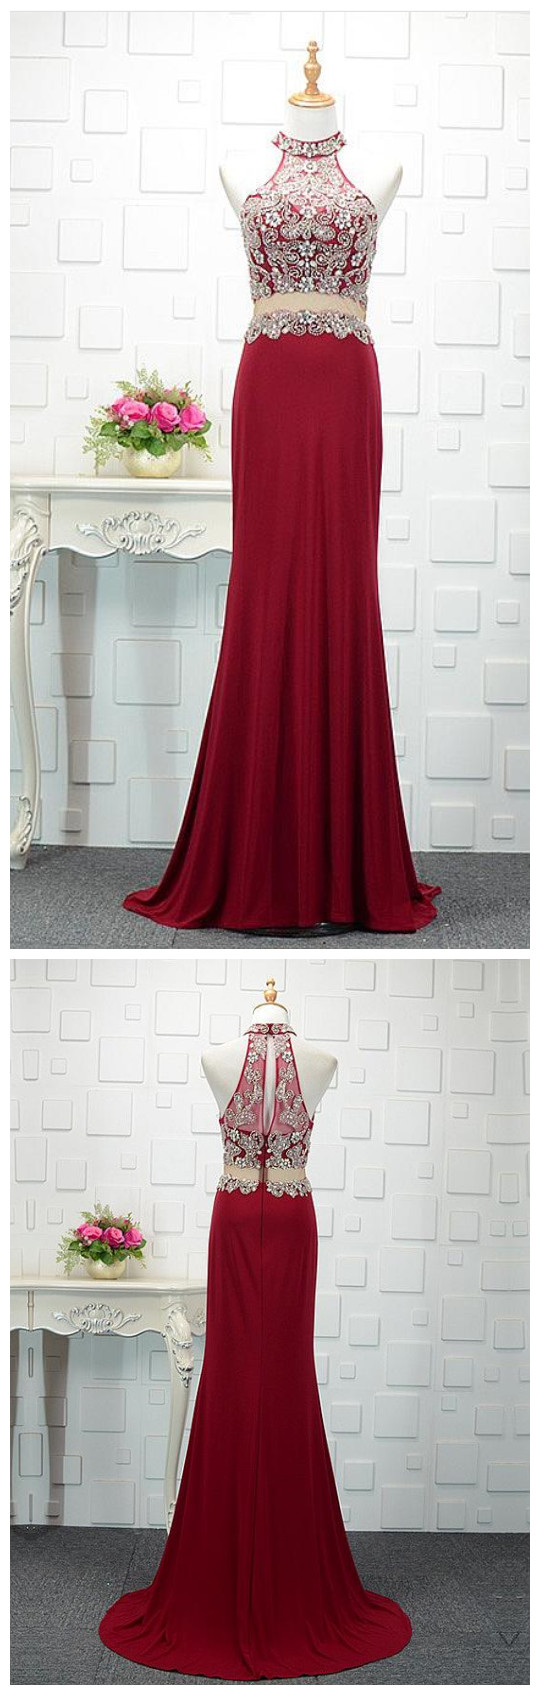 Red Newest Tulle & Spandex High Collar Mermaid Evening Dresses With Beadings